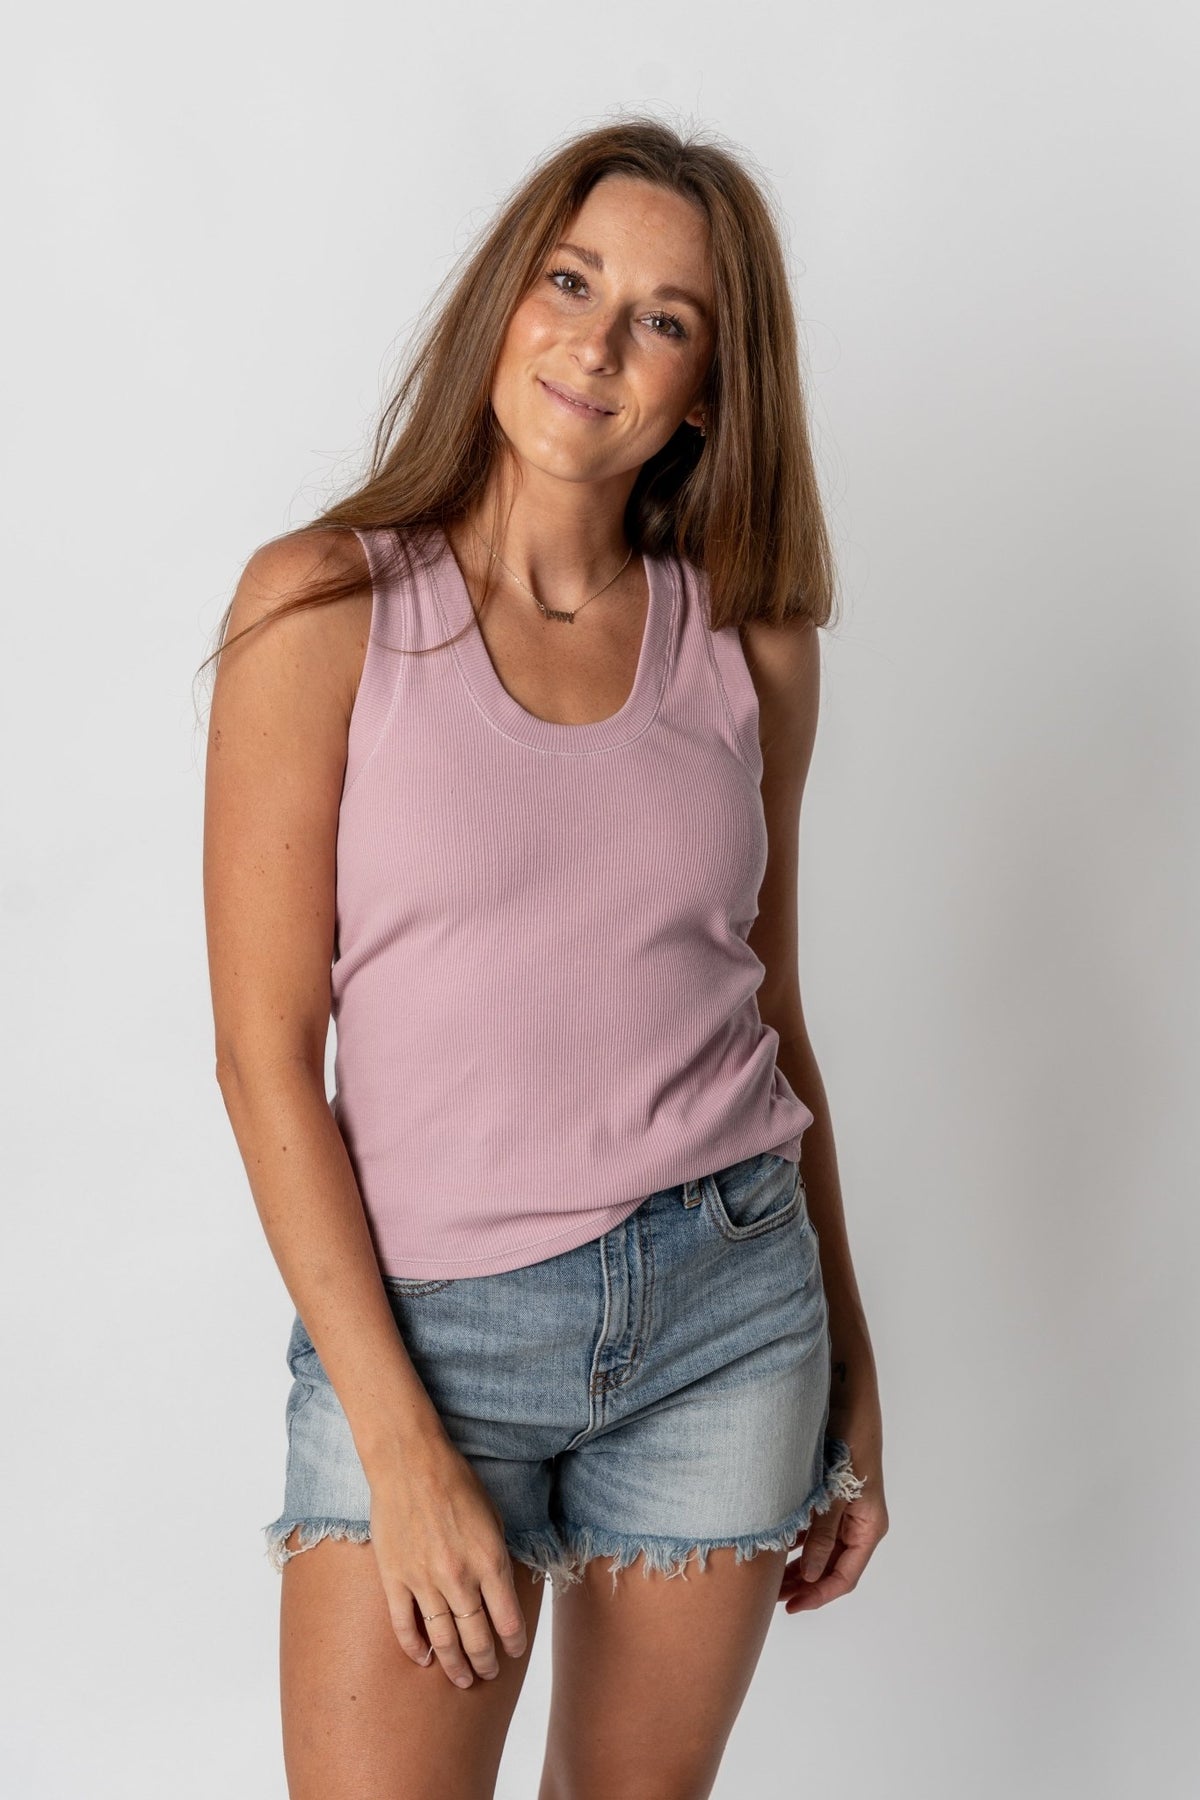 Z Supply Sirena ribbed tank shadow mauve - Z Supply Tank Top - Z Supply Tops, Dresses, Tanks, Tees, Cardigans, Joggers and Loungewear at Lush Fashion Lounge